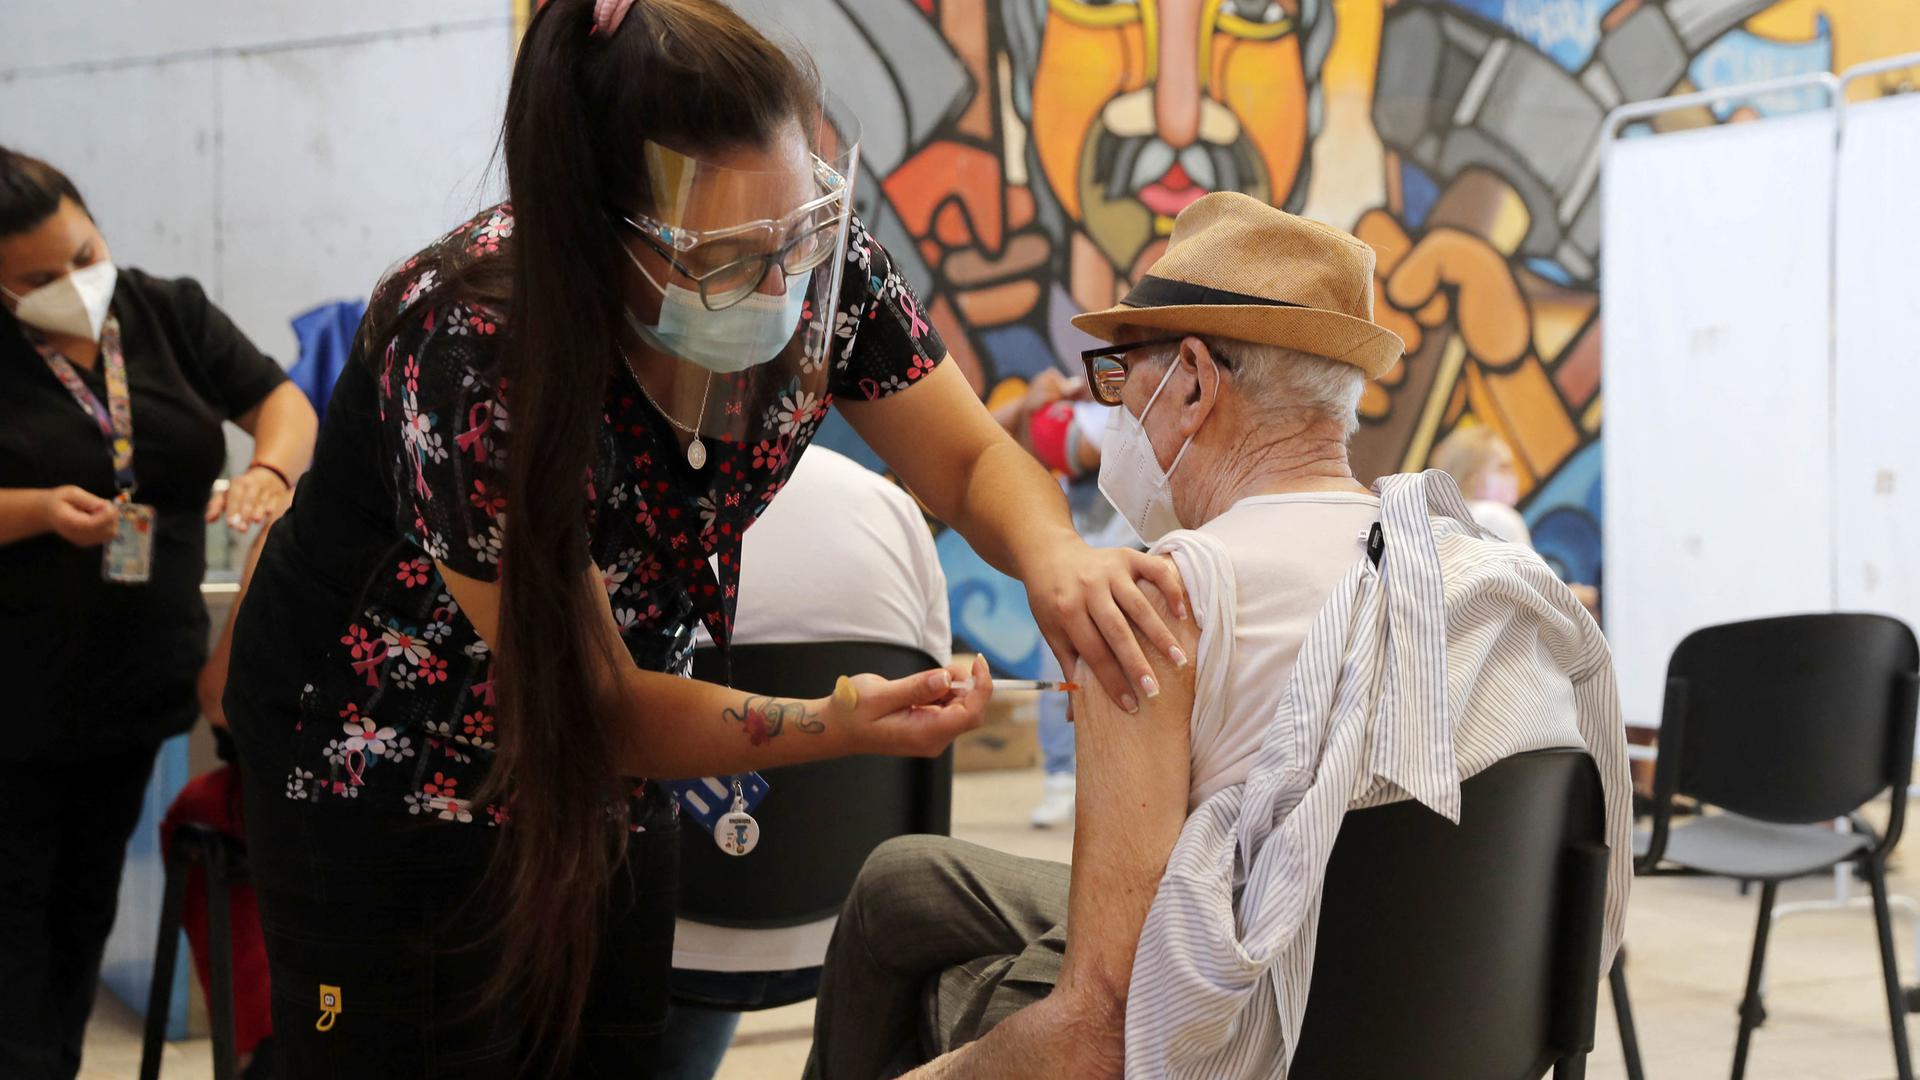 An elderly man receives a BioNtech Pfizer Covid-19 jab as a booster, in Santiago, on February 7, 2022. - Chile began vaccination on Monday with the fourth dose against covid-19, for  people over 55 years of age, in the midst of a wave of infections. (Photo by JAVIER TORRES / AFP)